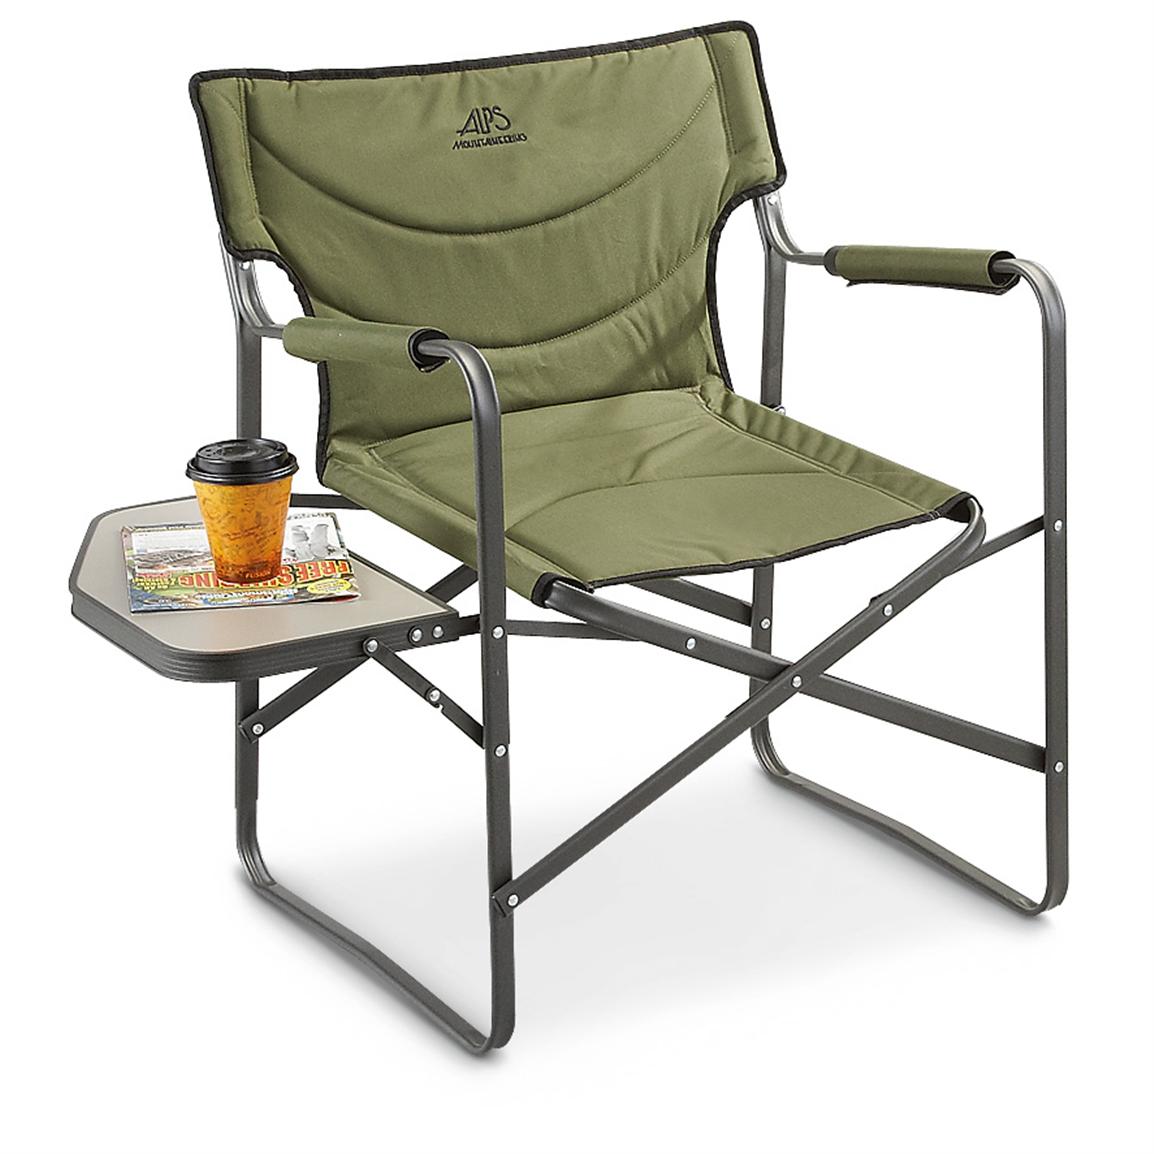 ALPS Creekside Foldable Camp Chair, Green 236509, Chairs at Sportsman